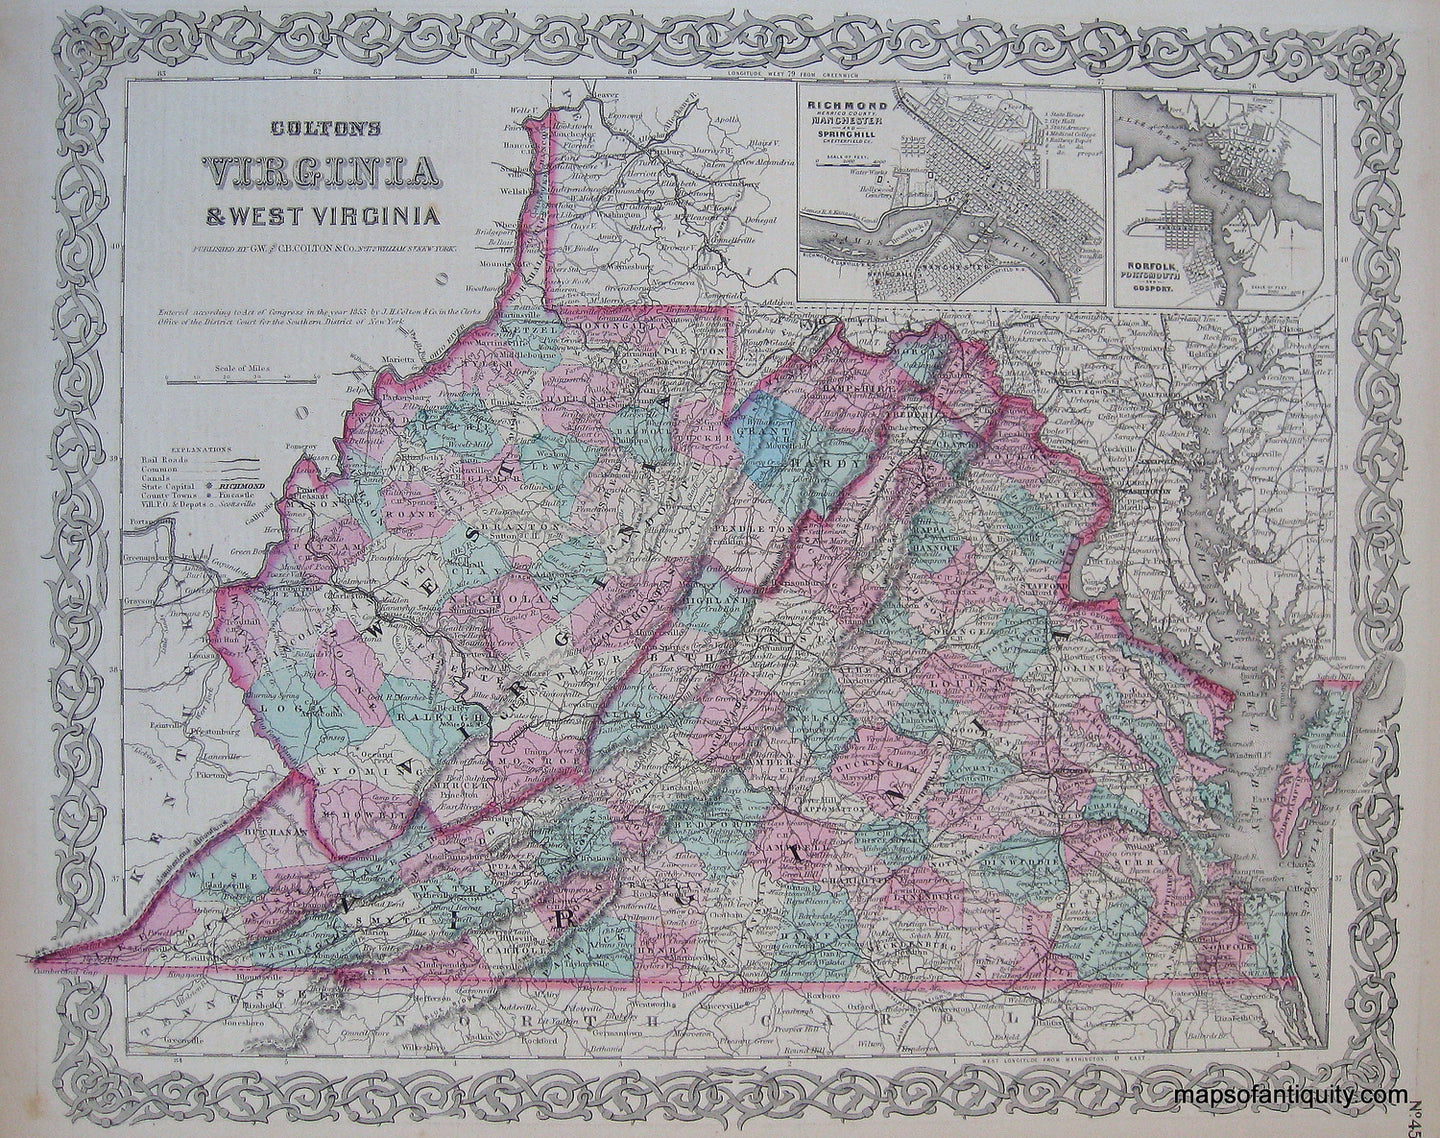 Antique-Hand-Colored-Map-Colton's-Virginia-and-West-Virginia-******-United-States-Virginia-1871-Colton-Maps-Of-Antiquity